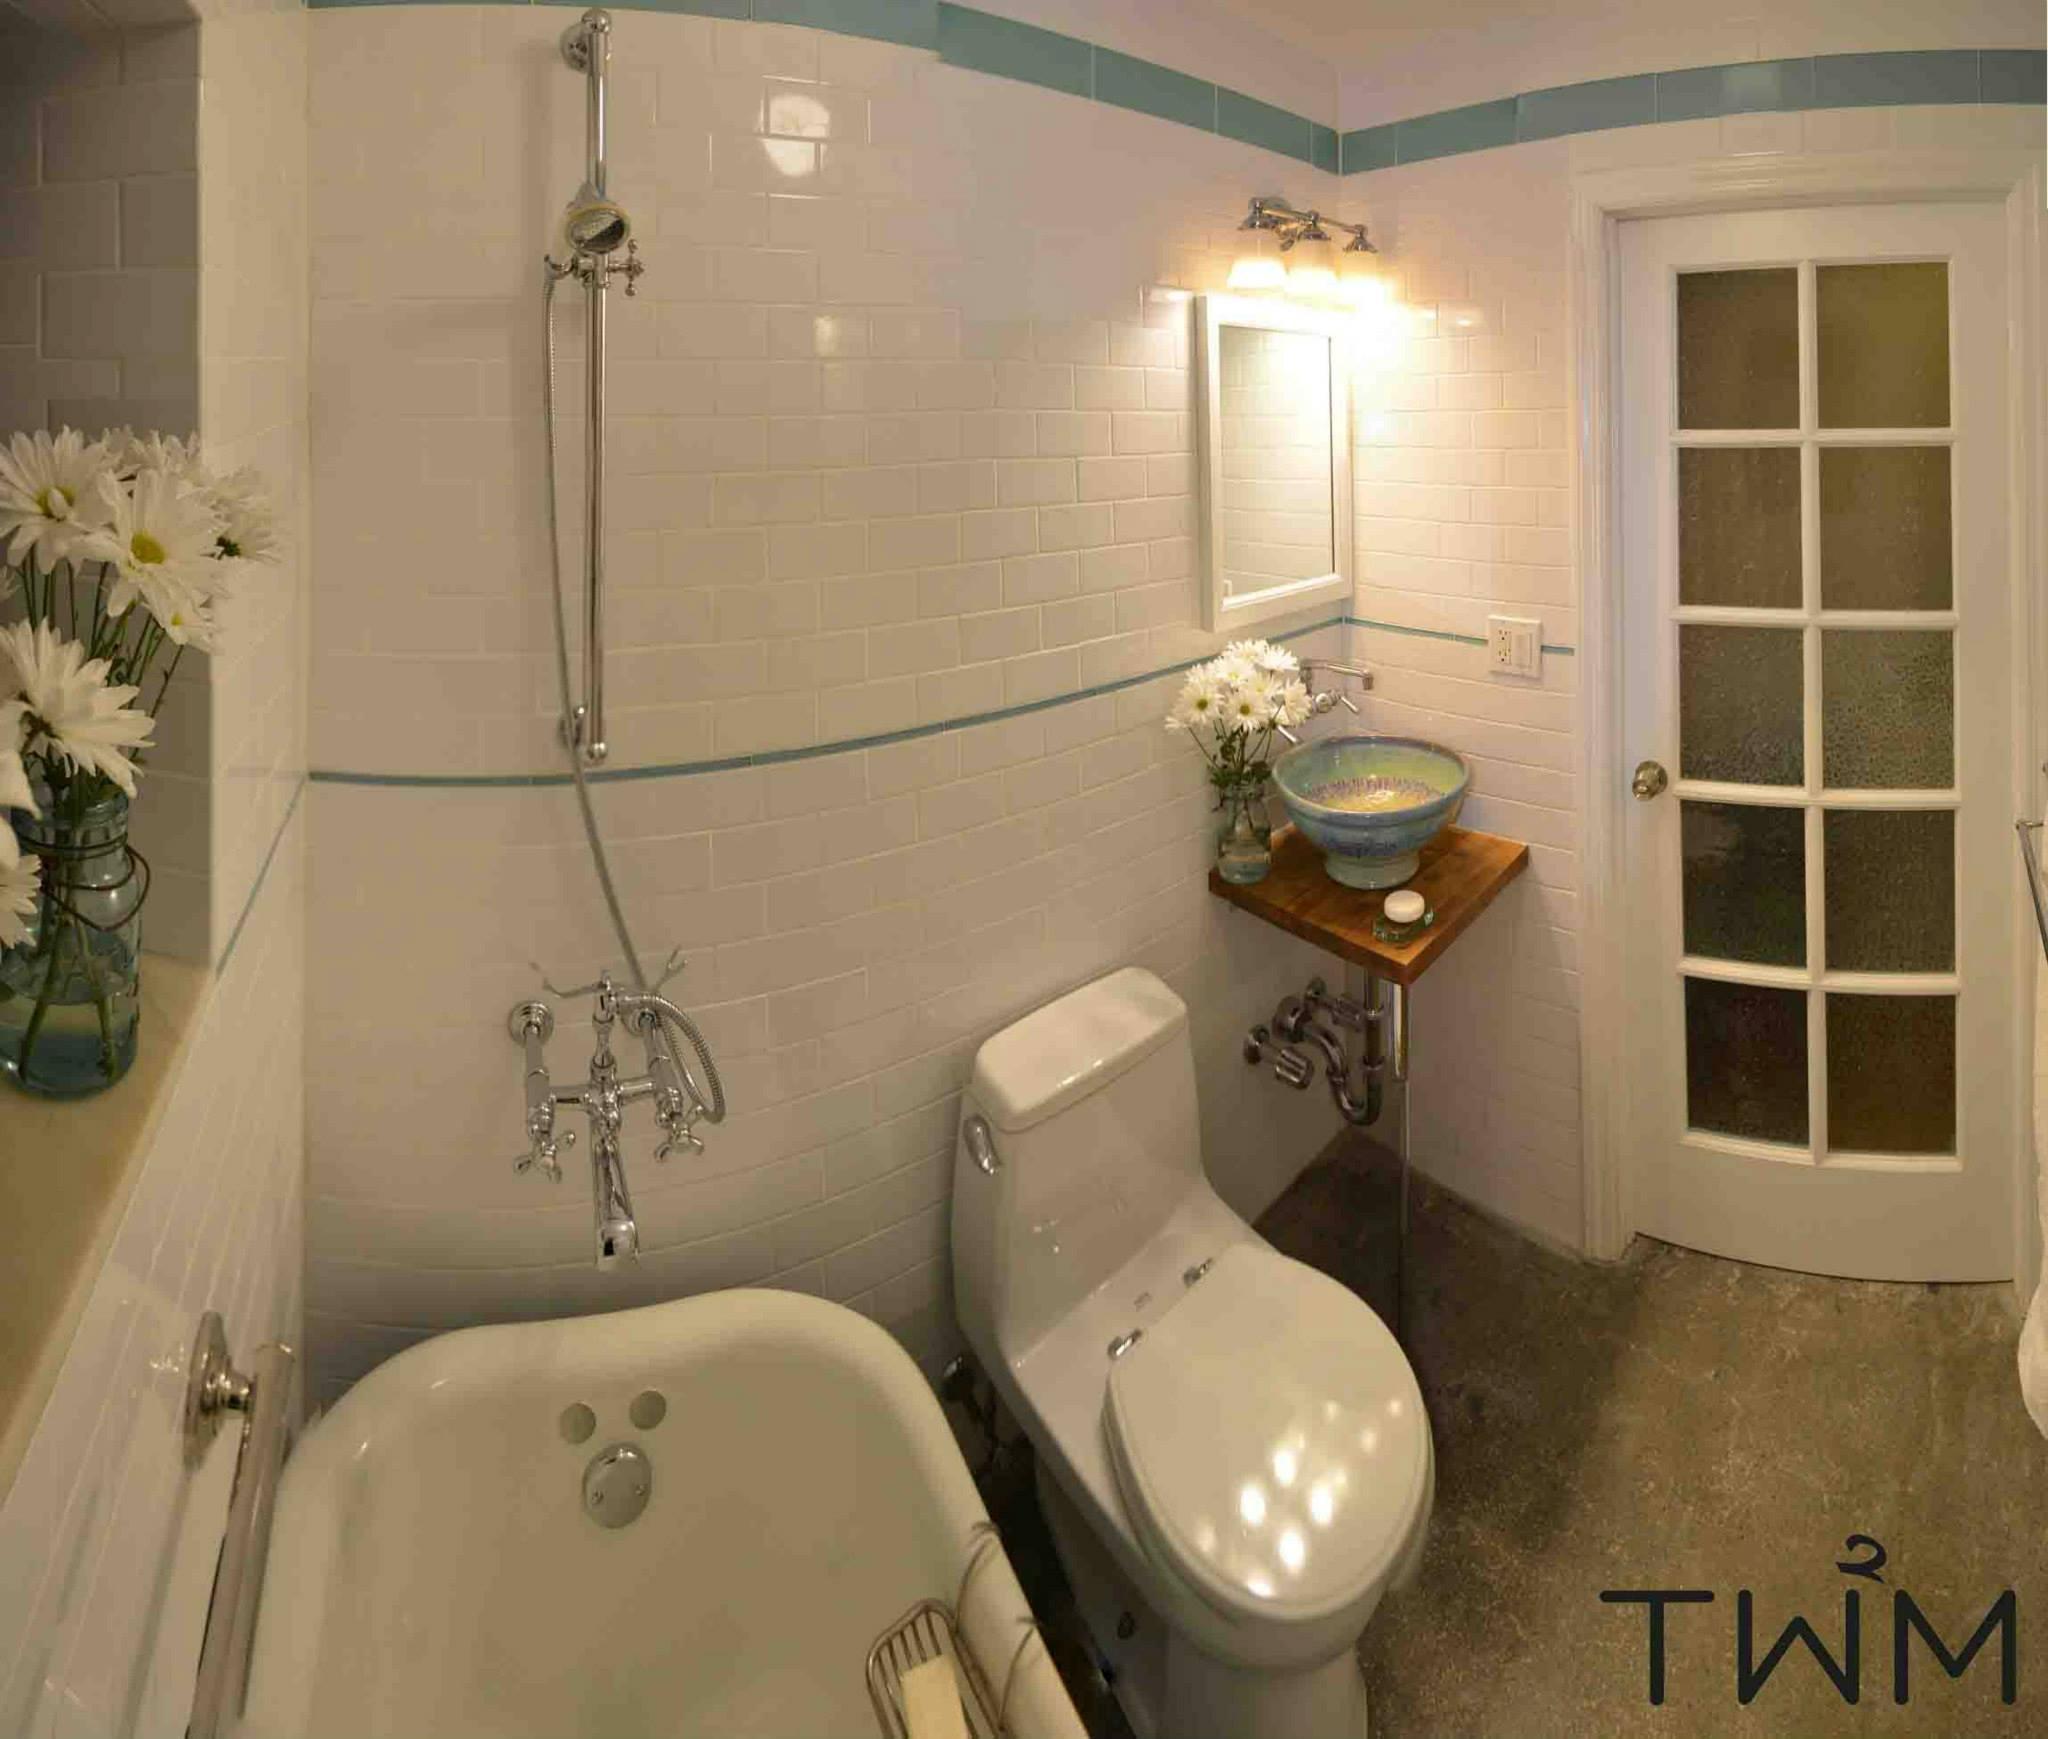 Tw2m was chosen to Design and Build a Reclaimed Vintage Bathroom. Claw foot tub, custom sink, reclaimed TOTO toilet, and custom door with reclaimed glass